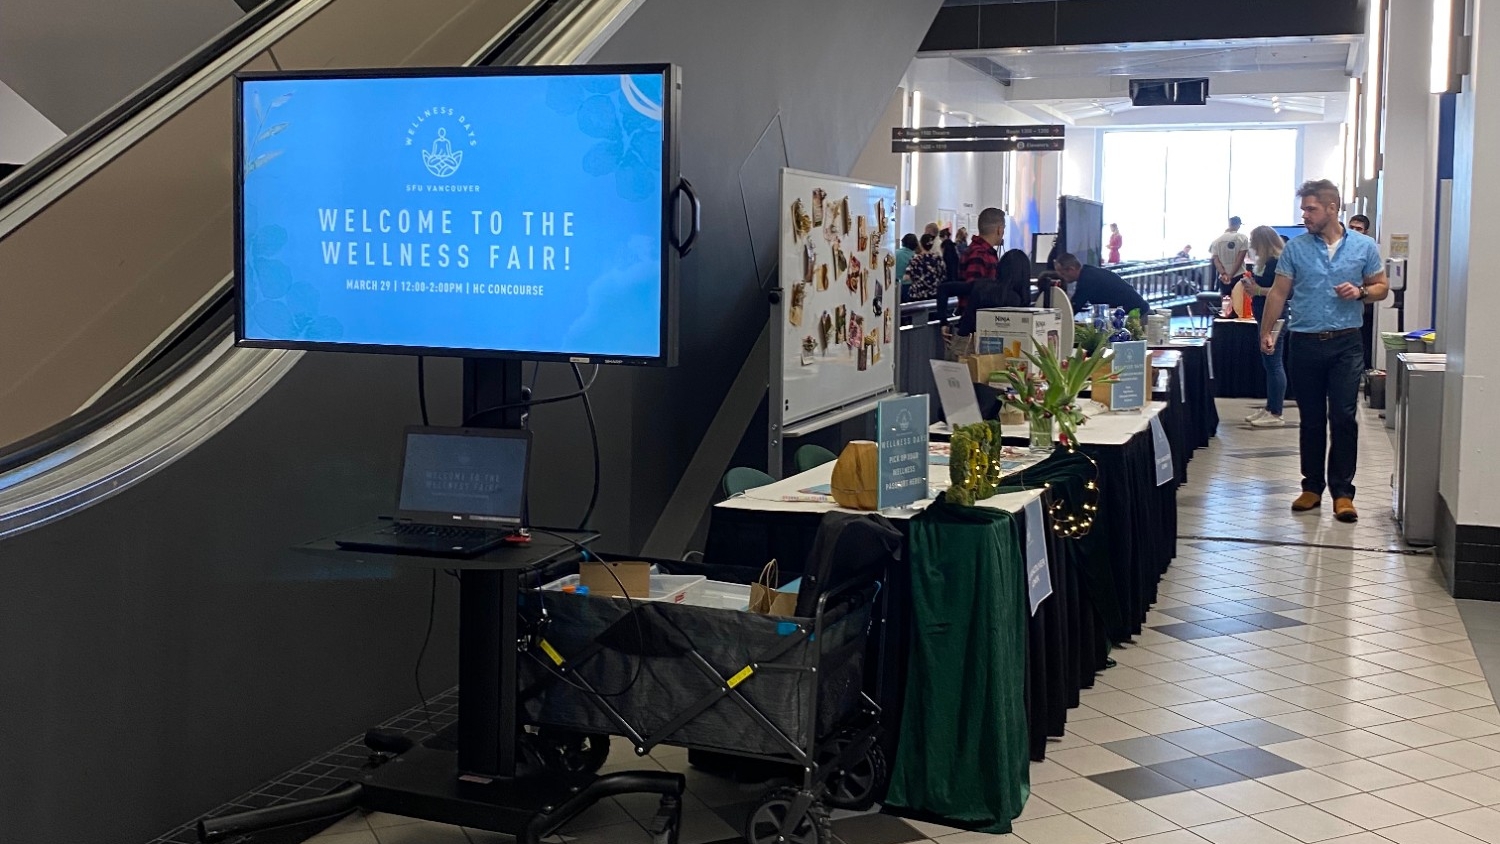 A monitor reading "Welcome to the Wellness Fair!" with multiple tables and people in the background at Wellness Fair, as part of 2023 Wellness Days